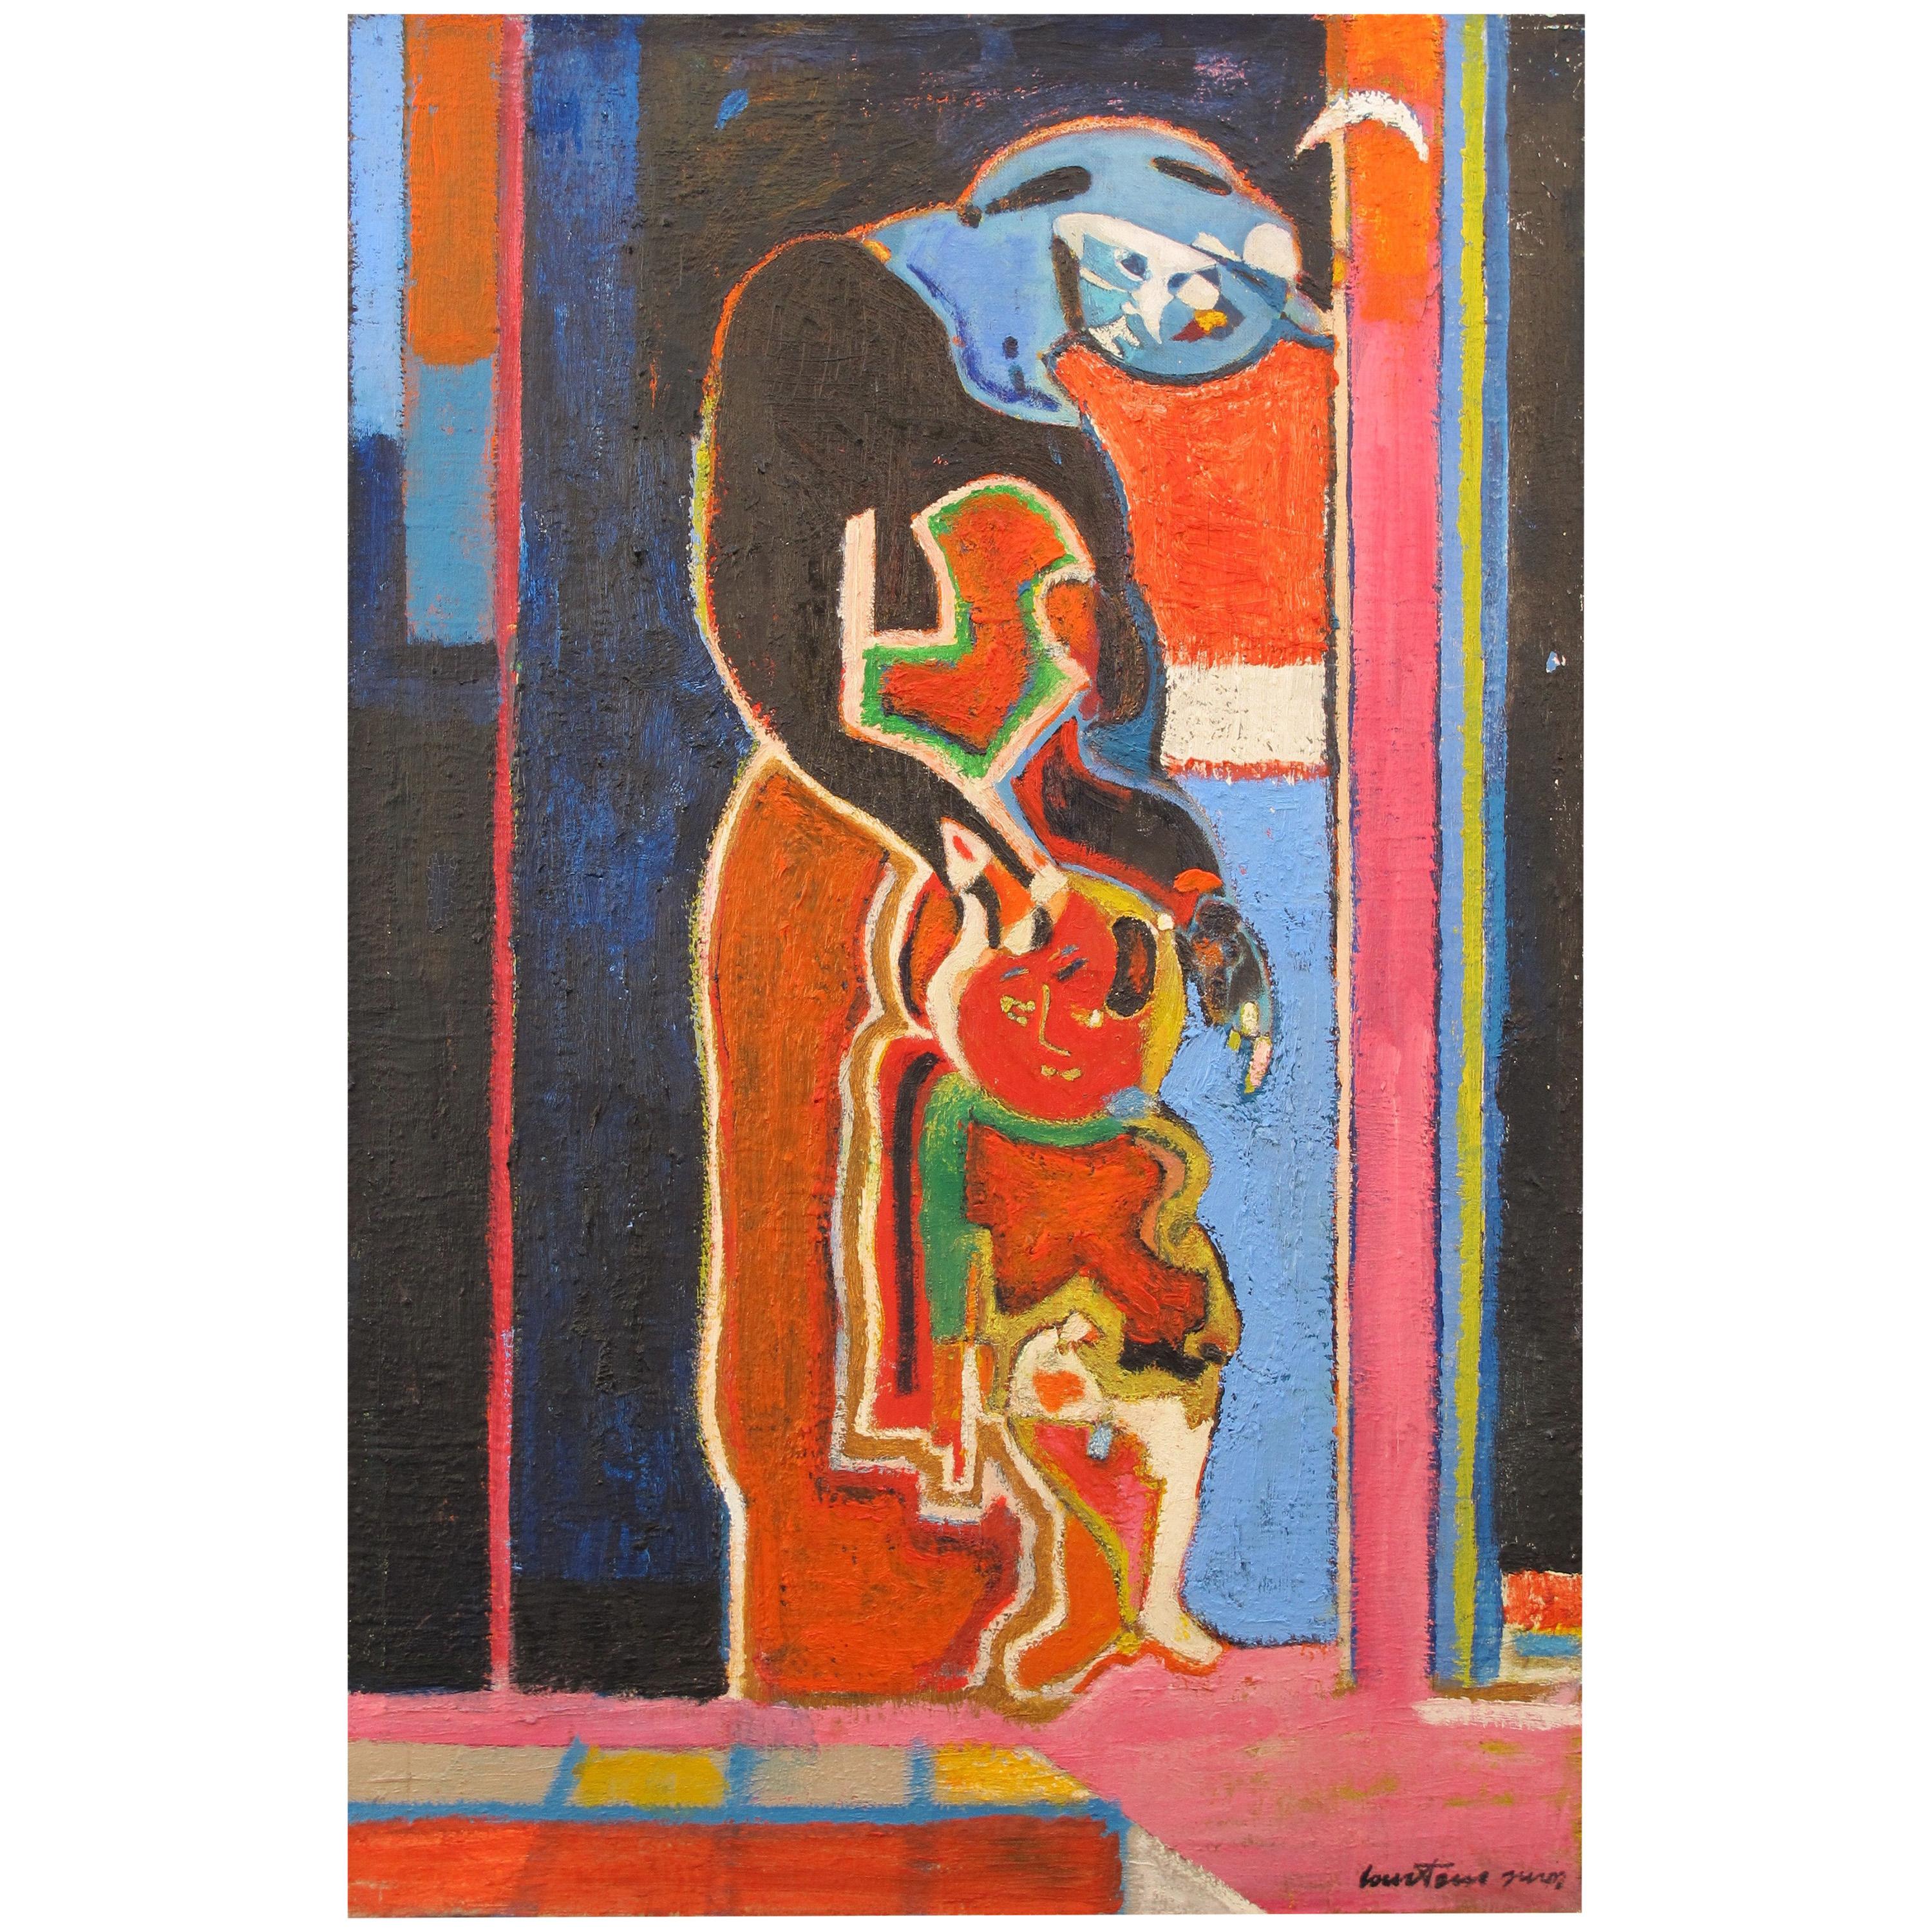 Paint "Maternity, 1983" by Pierre Courtens